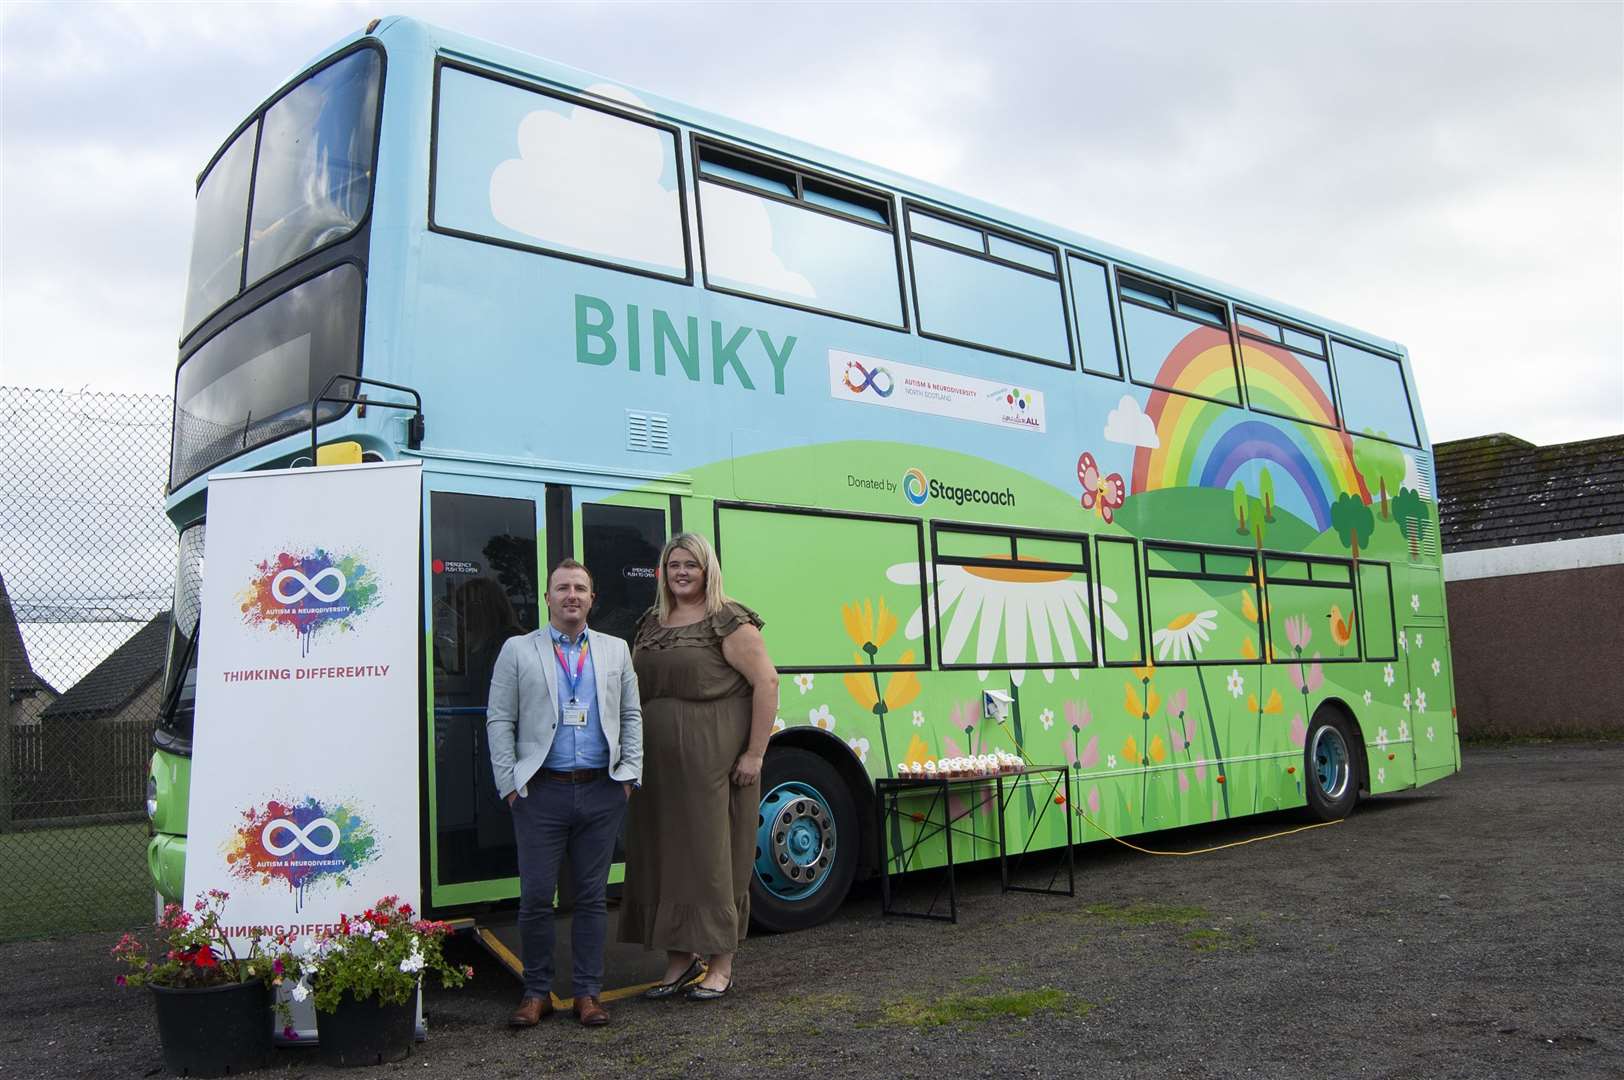 A-ND CEO Billy Alexander and Services Manager for Binky and Outreach Support Francesca Read alongside Binky the Sensory Bus.